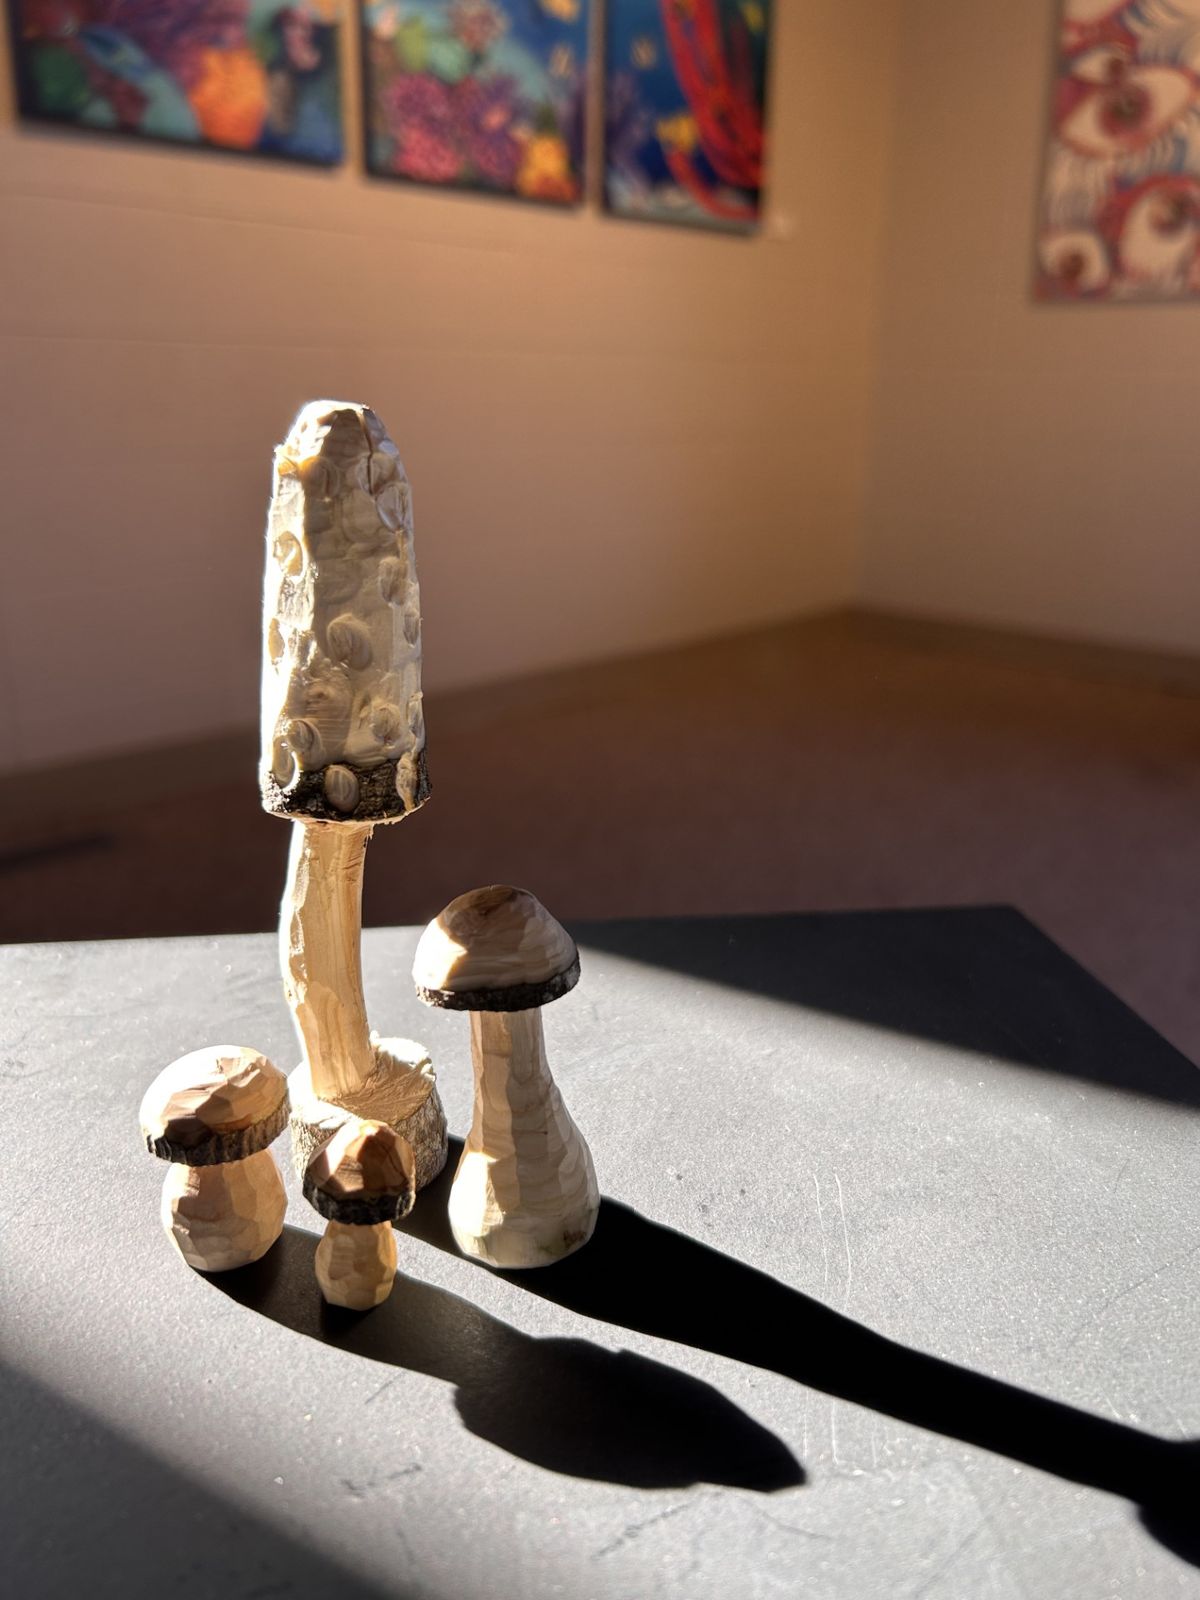 First Wednesdays: Carving Wooden Mushrooms